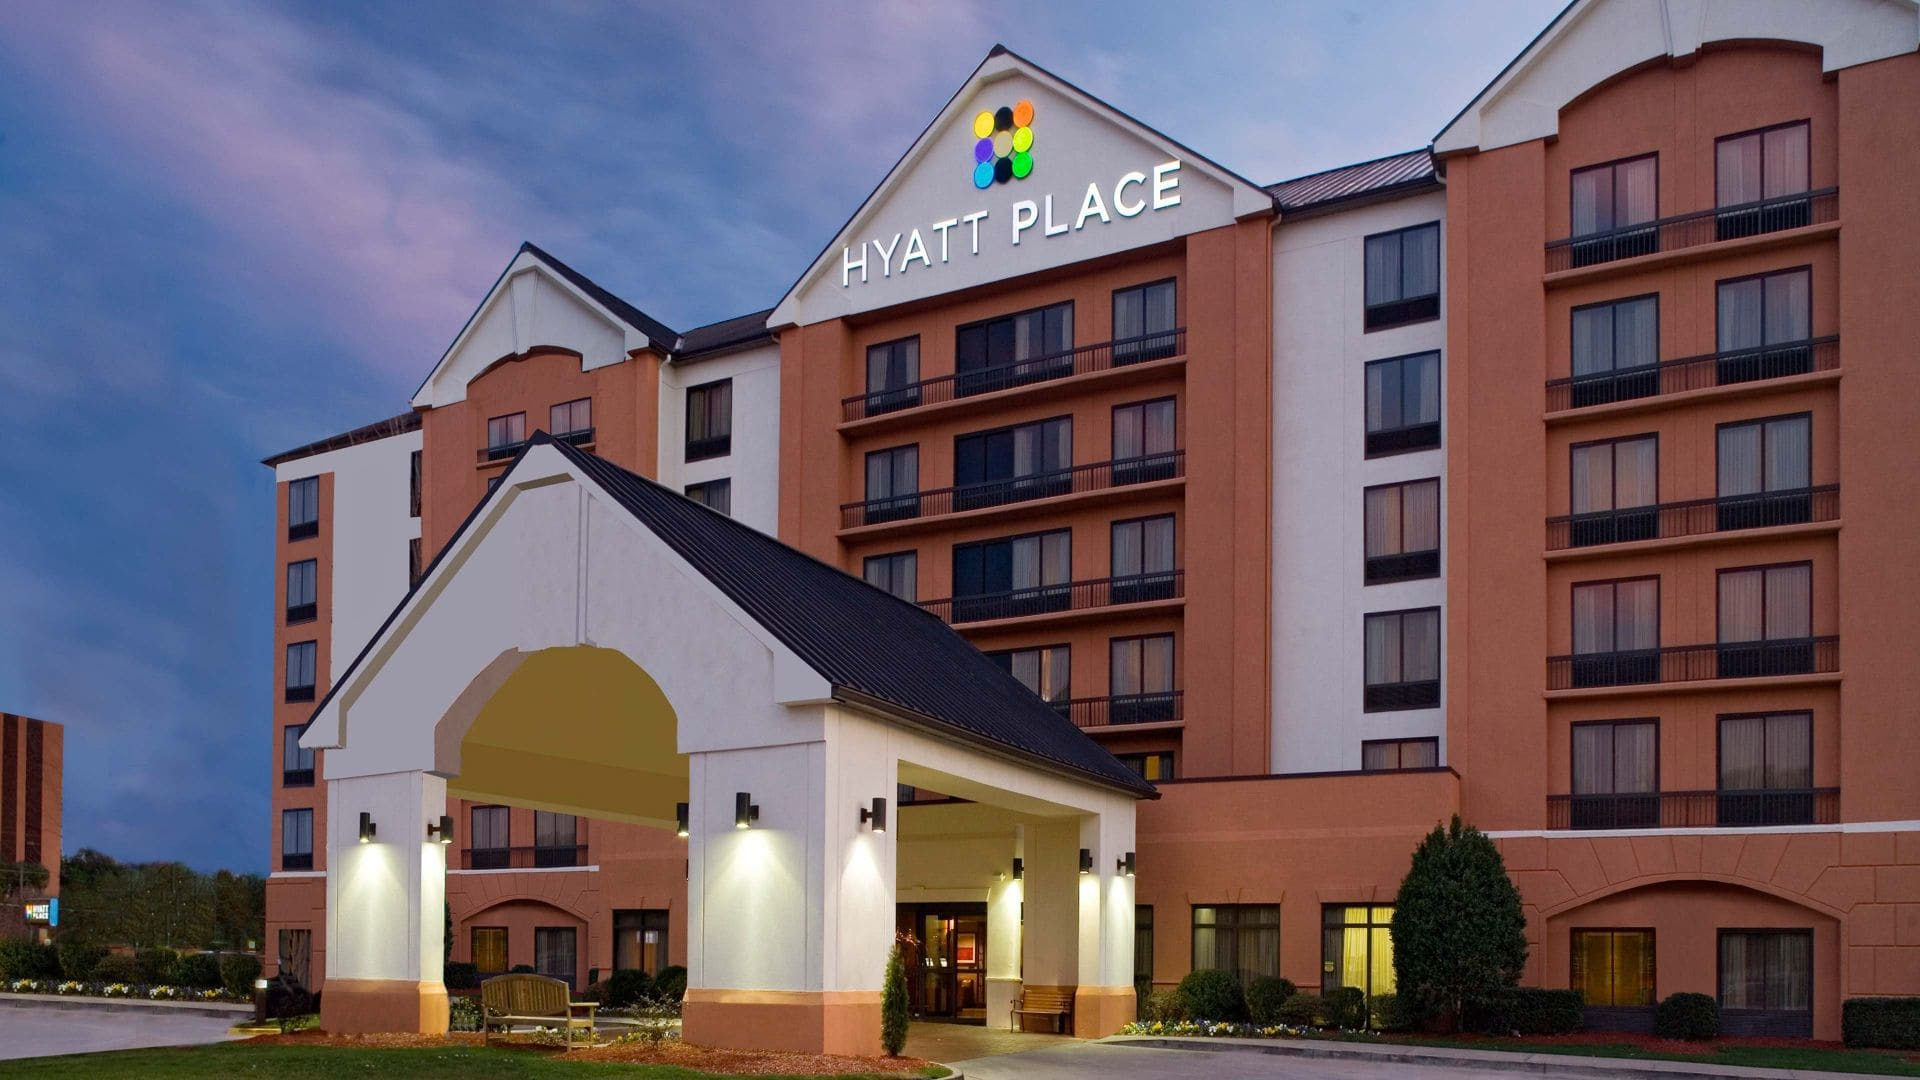 Contemporary Fort Worth Hotel Near Downtown | Hyatt Place Fort Worth - Map Of Hotels Near Fort Worth Texas Convention Center